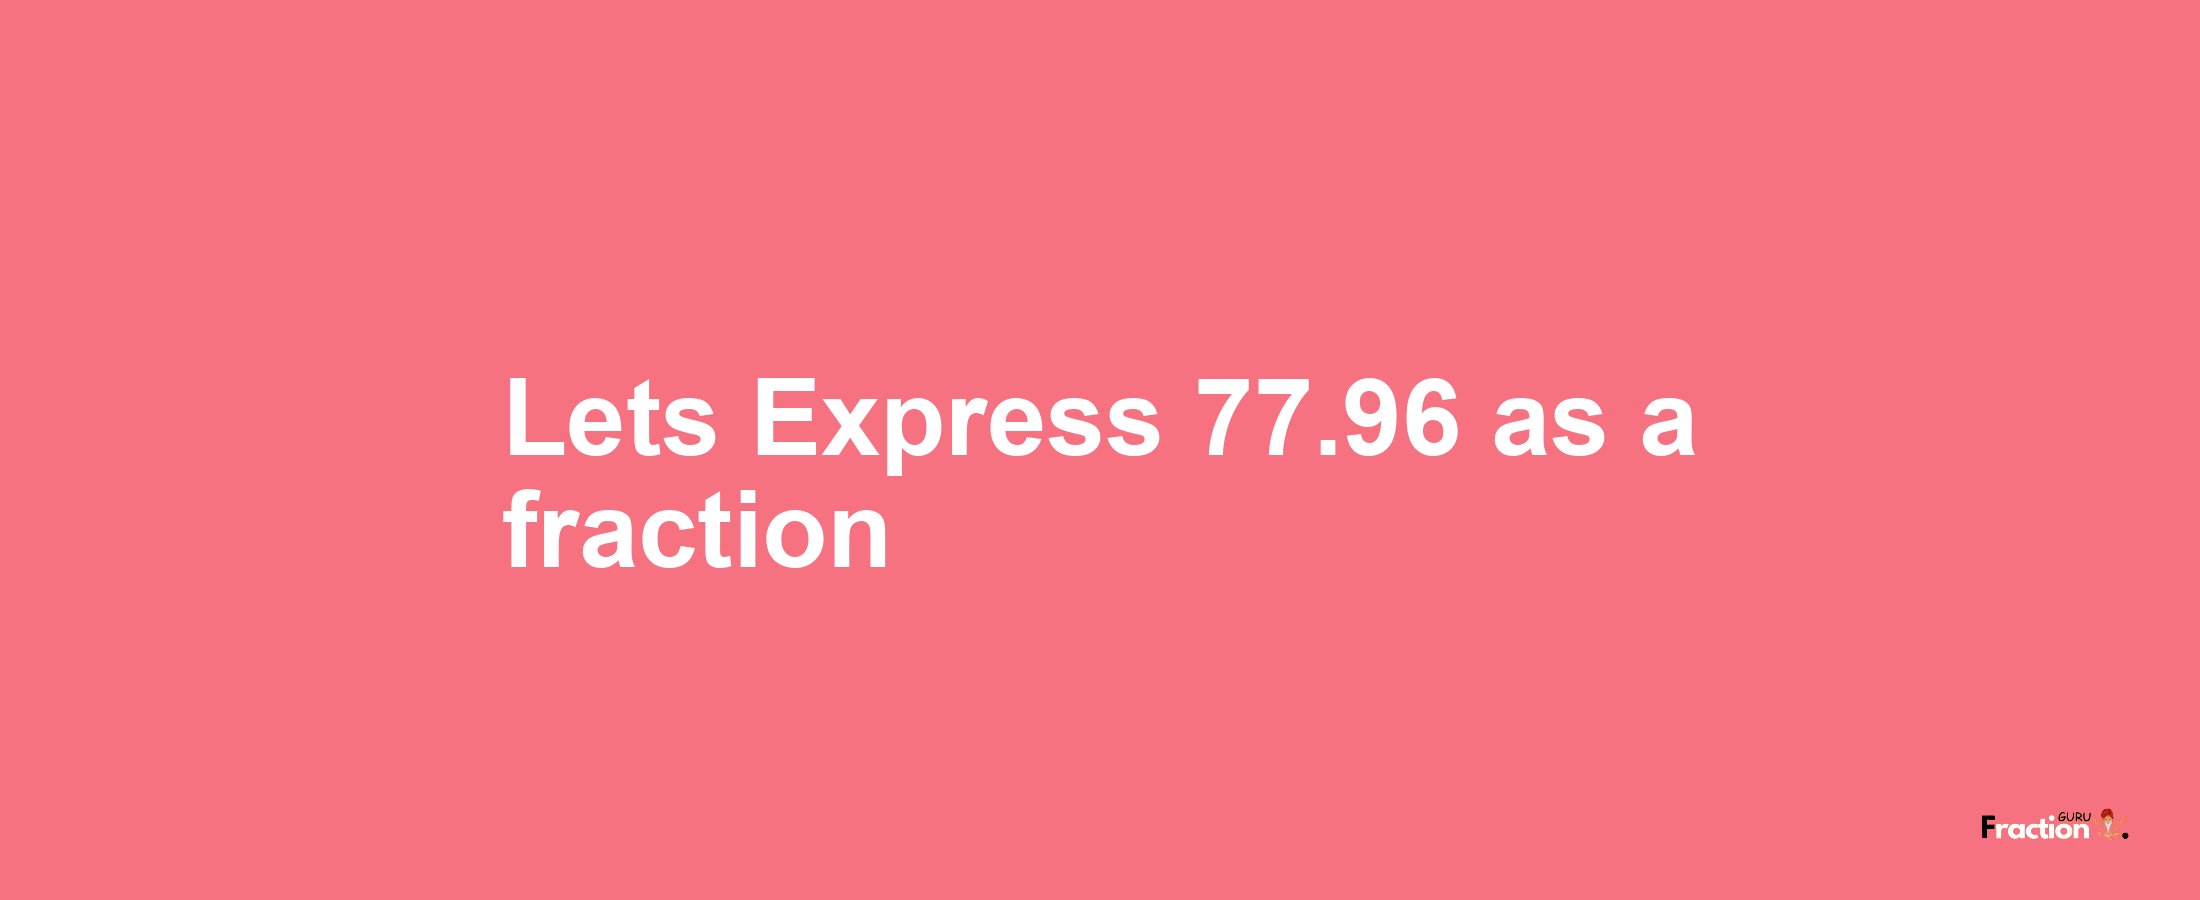 Lets Express 77.96 as afraction